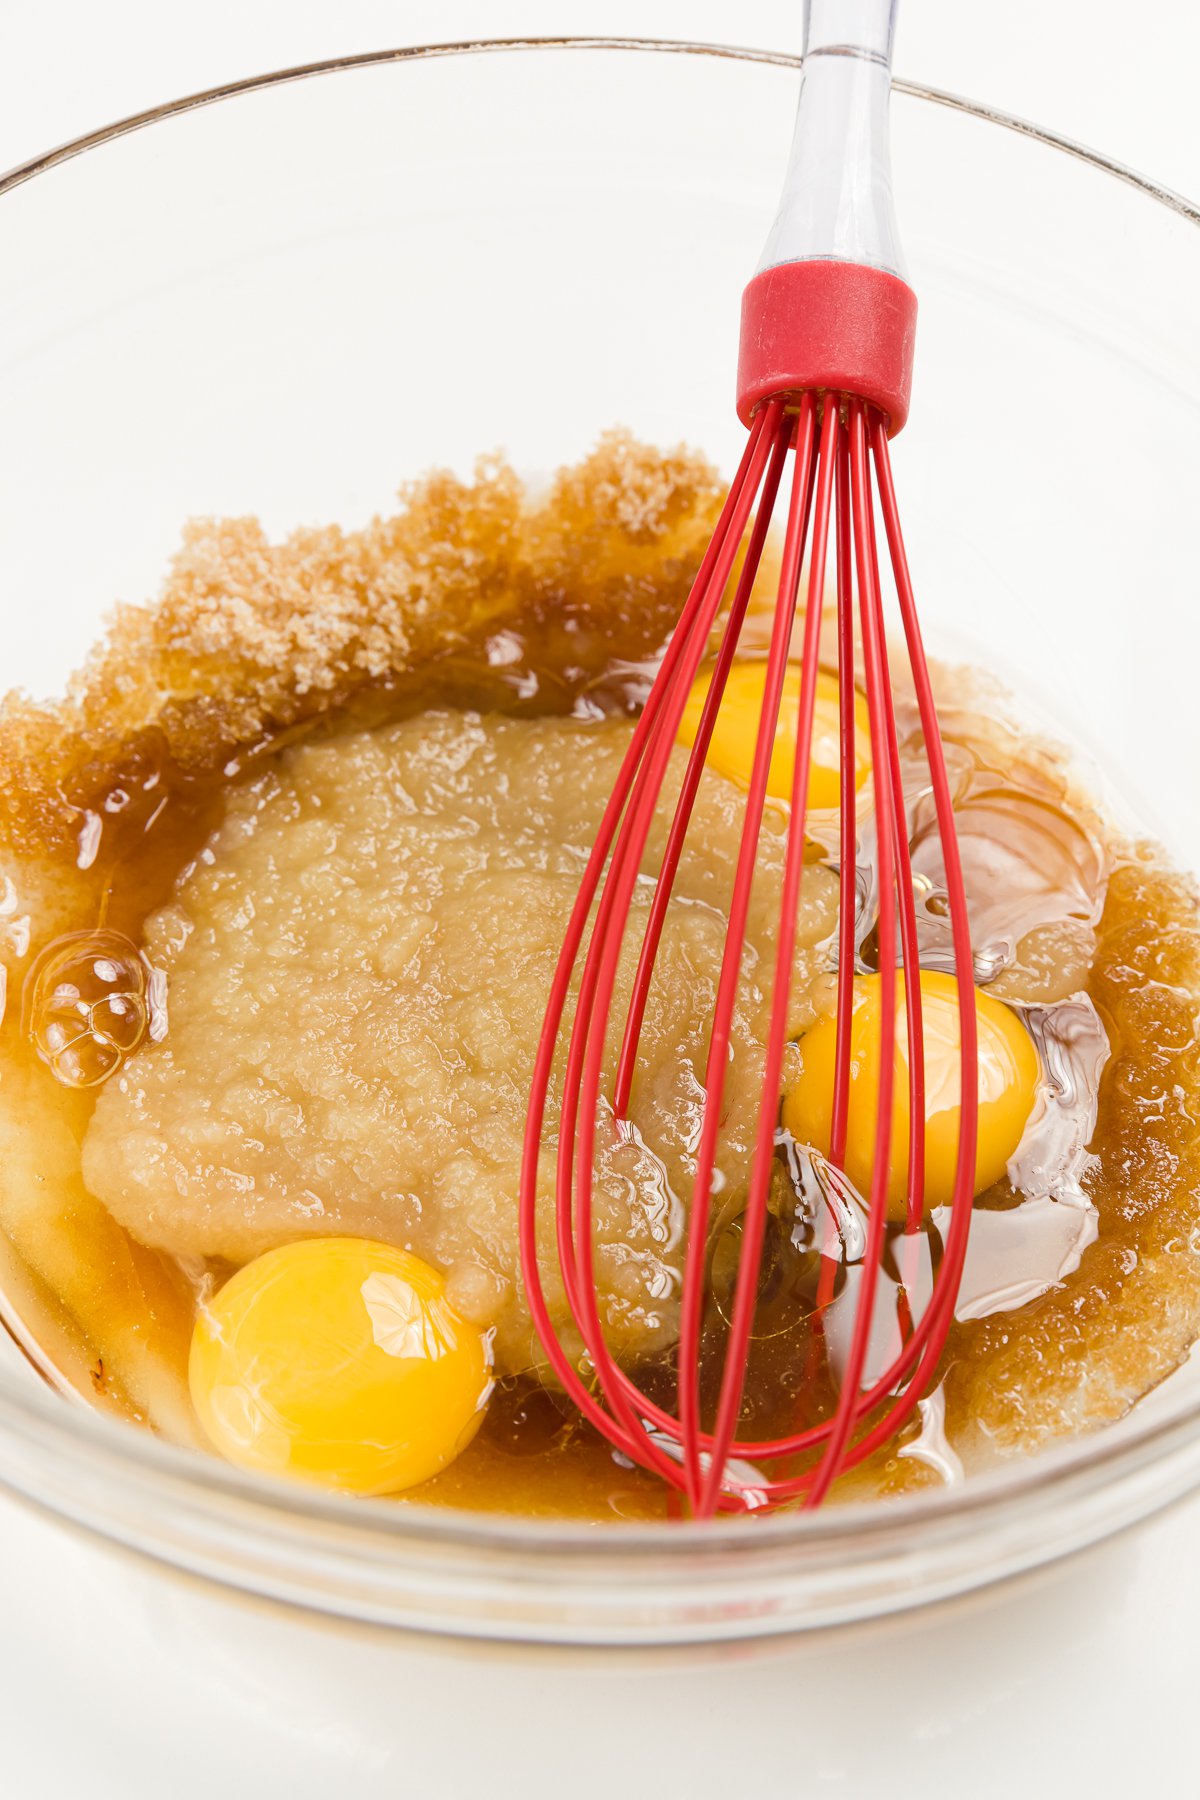 Red whisk whisking eggs and other ingredients in a glass bowl